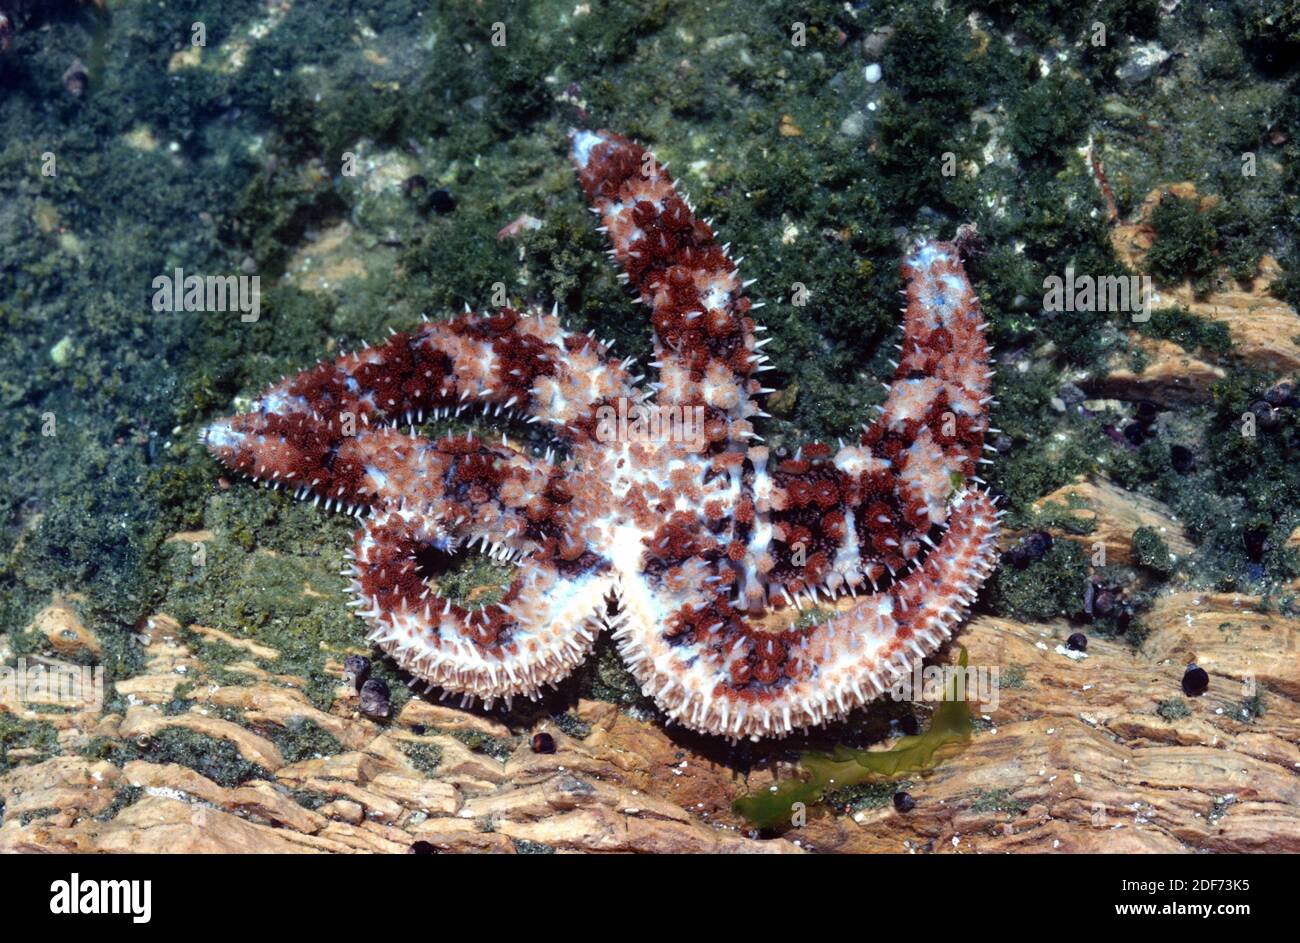 Blue spiny starfish (Coscinasterias tenuispina) is a sea star omnivore. Specimen with an anormal number of arms. This photo was taken in Cap Ras, Stock Photo